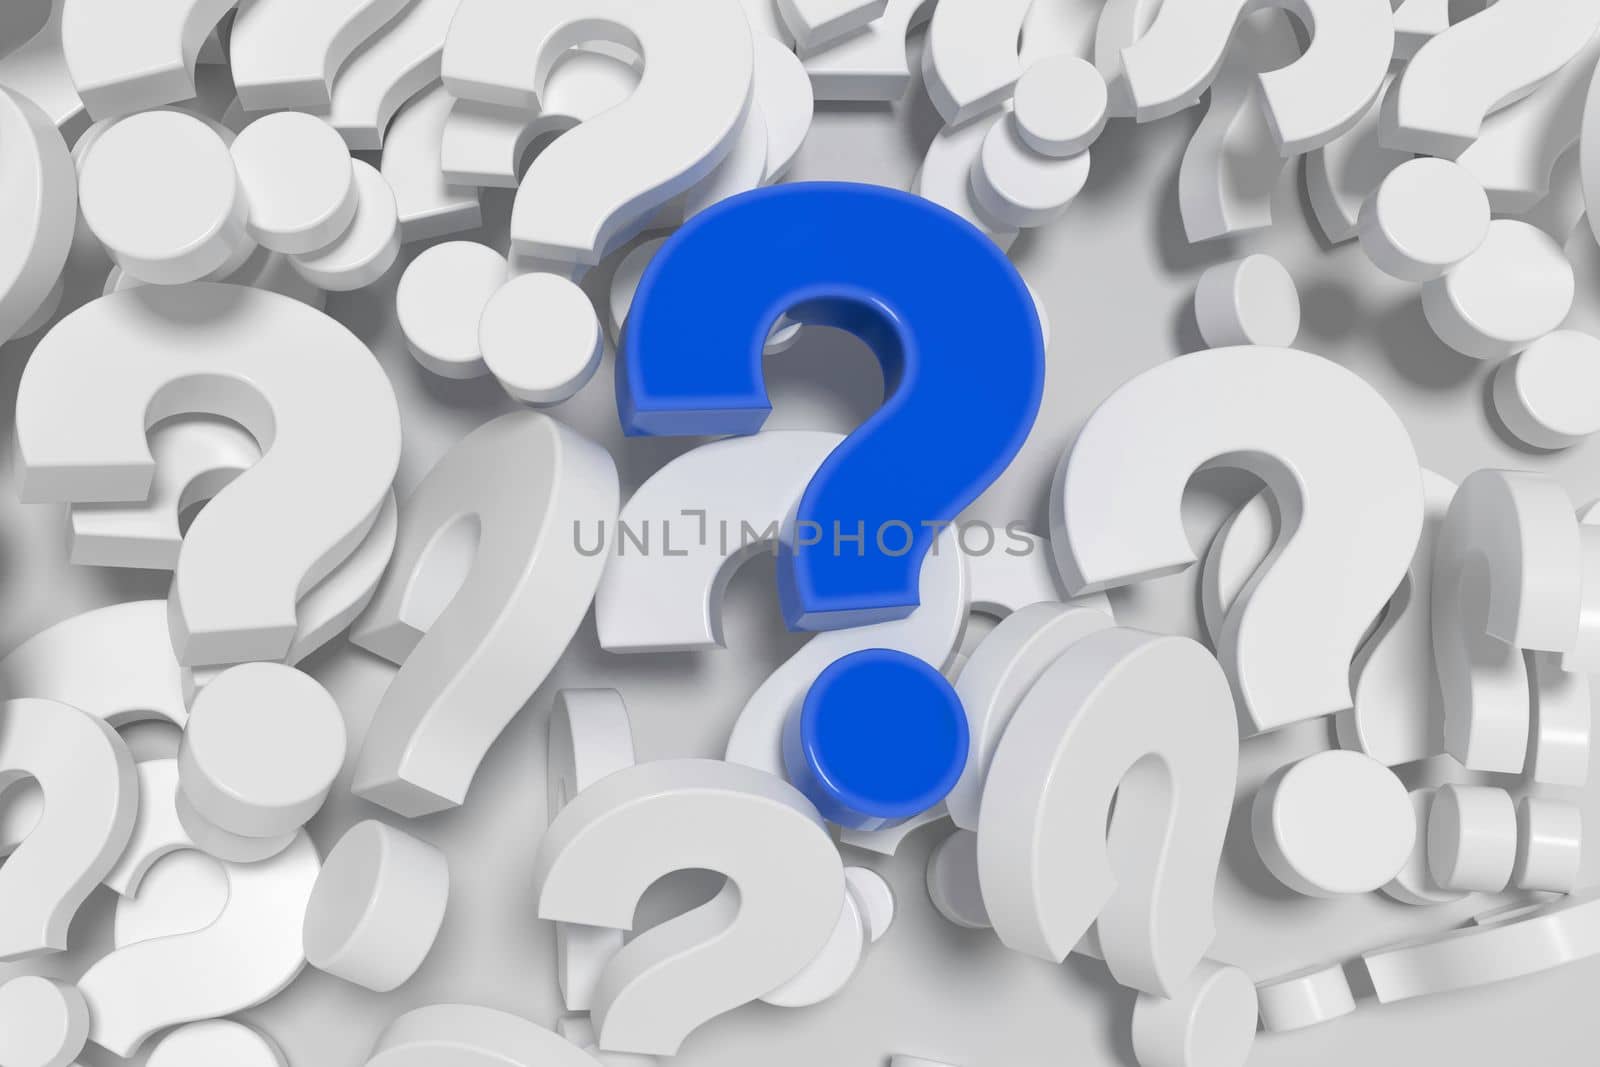 Pile of white question mark symbols with blue question mark on top. 3D illustration